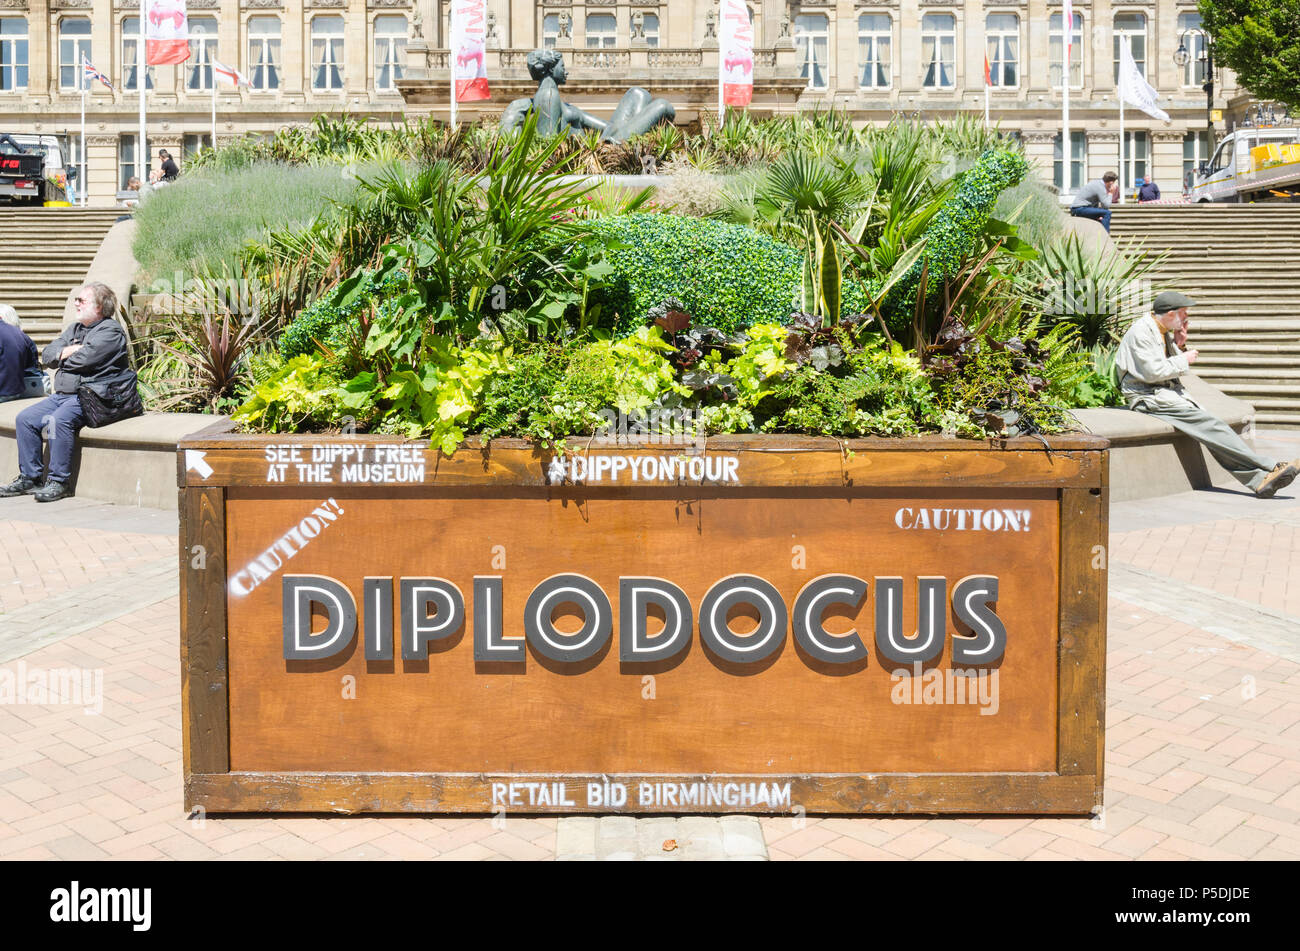 Plant troughs with dinosaurs made from plant displays to publicise Dippy on Tour, the Diplodocus,at Birmingham Museum and Art Gallery Stock Photo